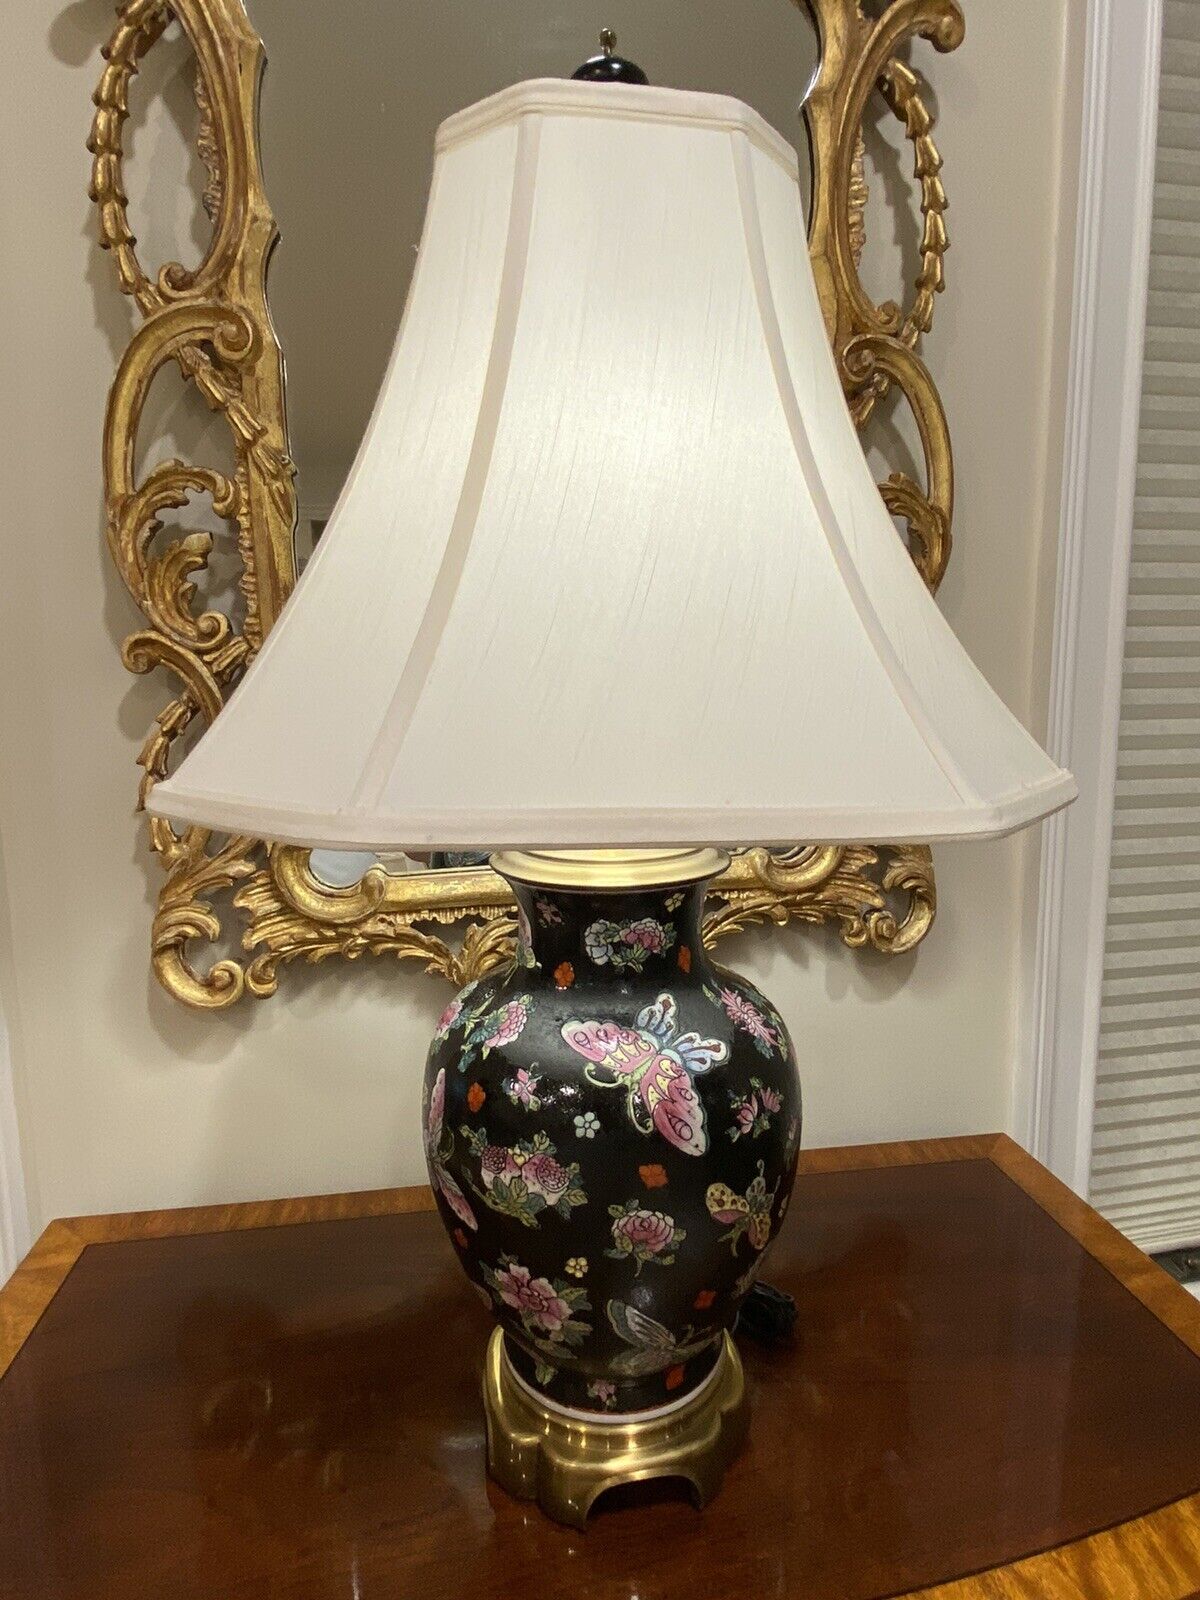 Stunning Onyx Porcelain Lamp Handpainted with Butterflies and Florals: w/Shade